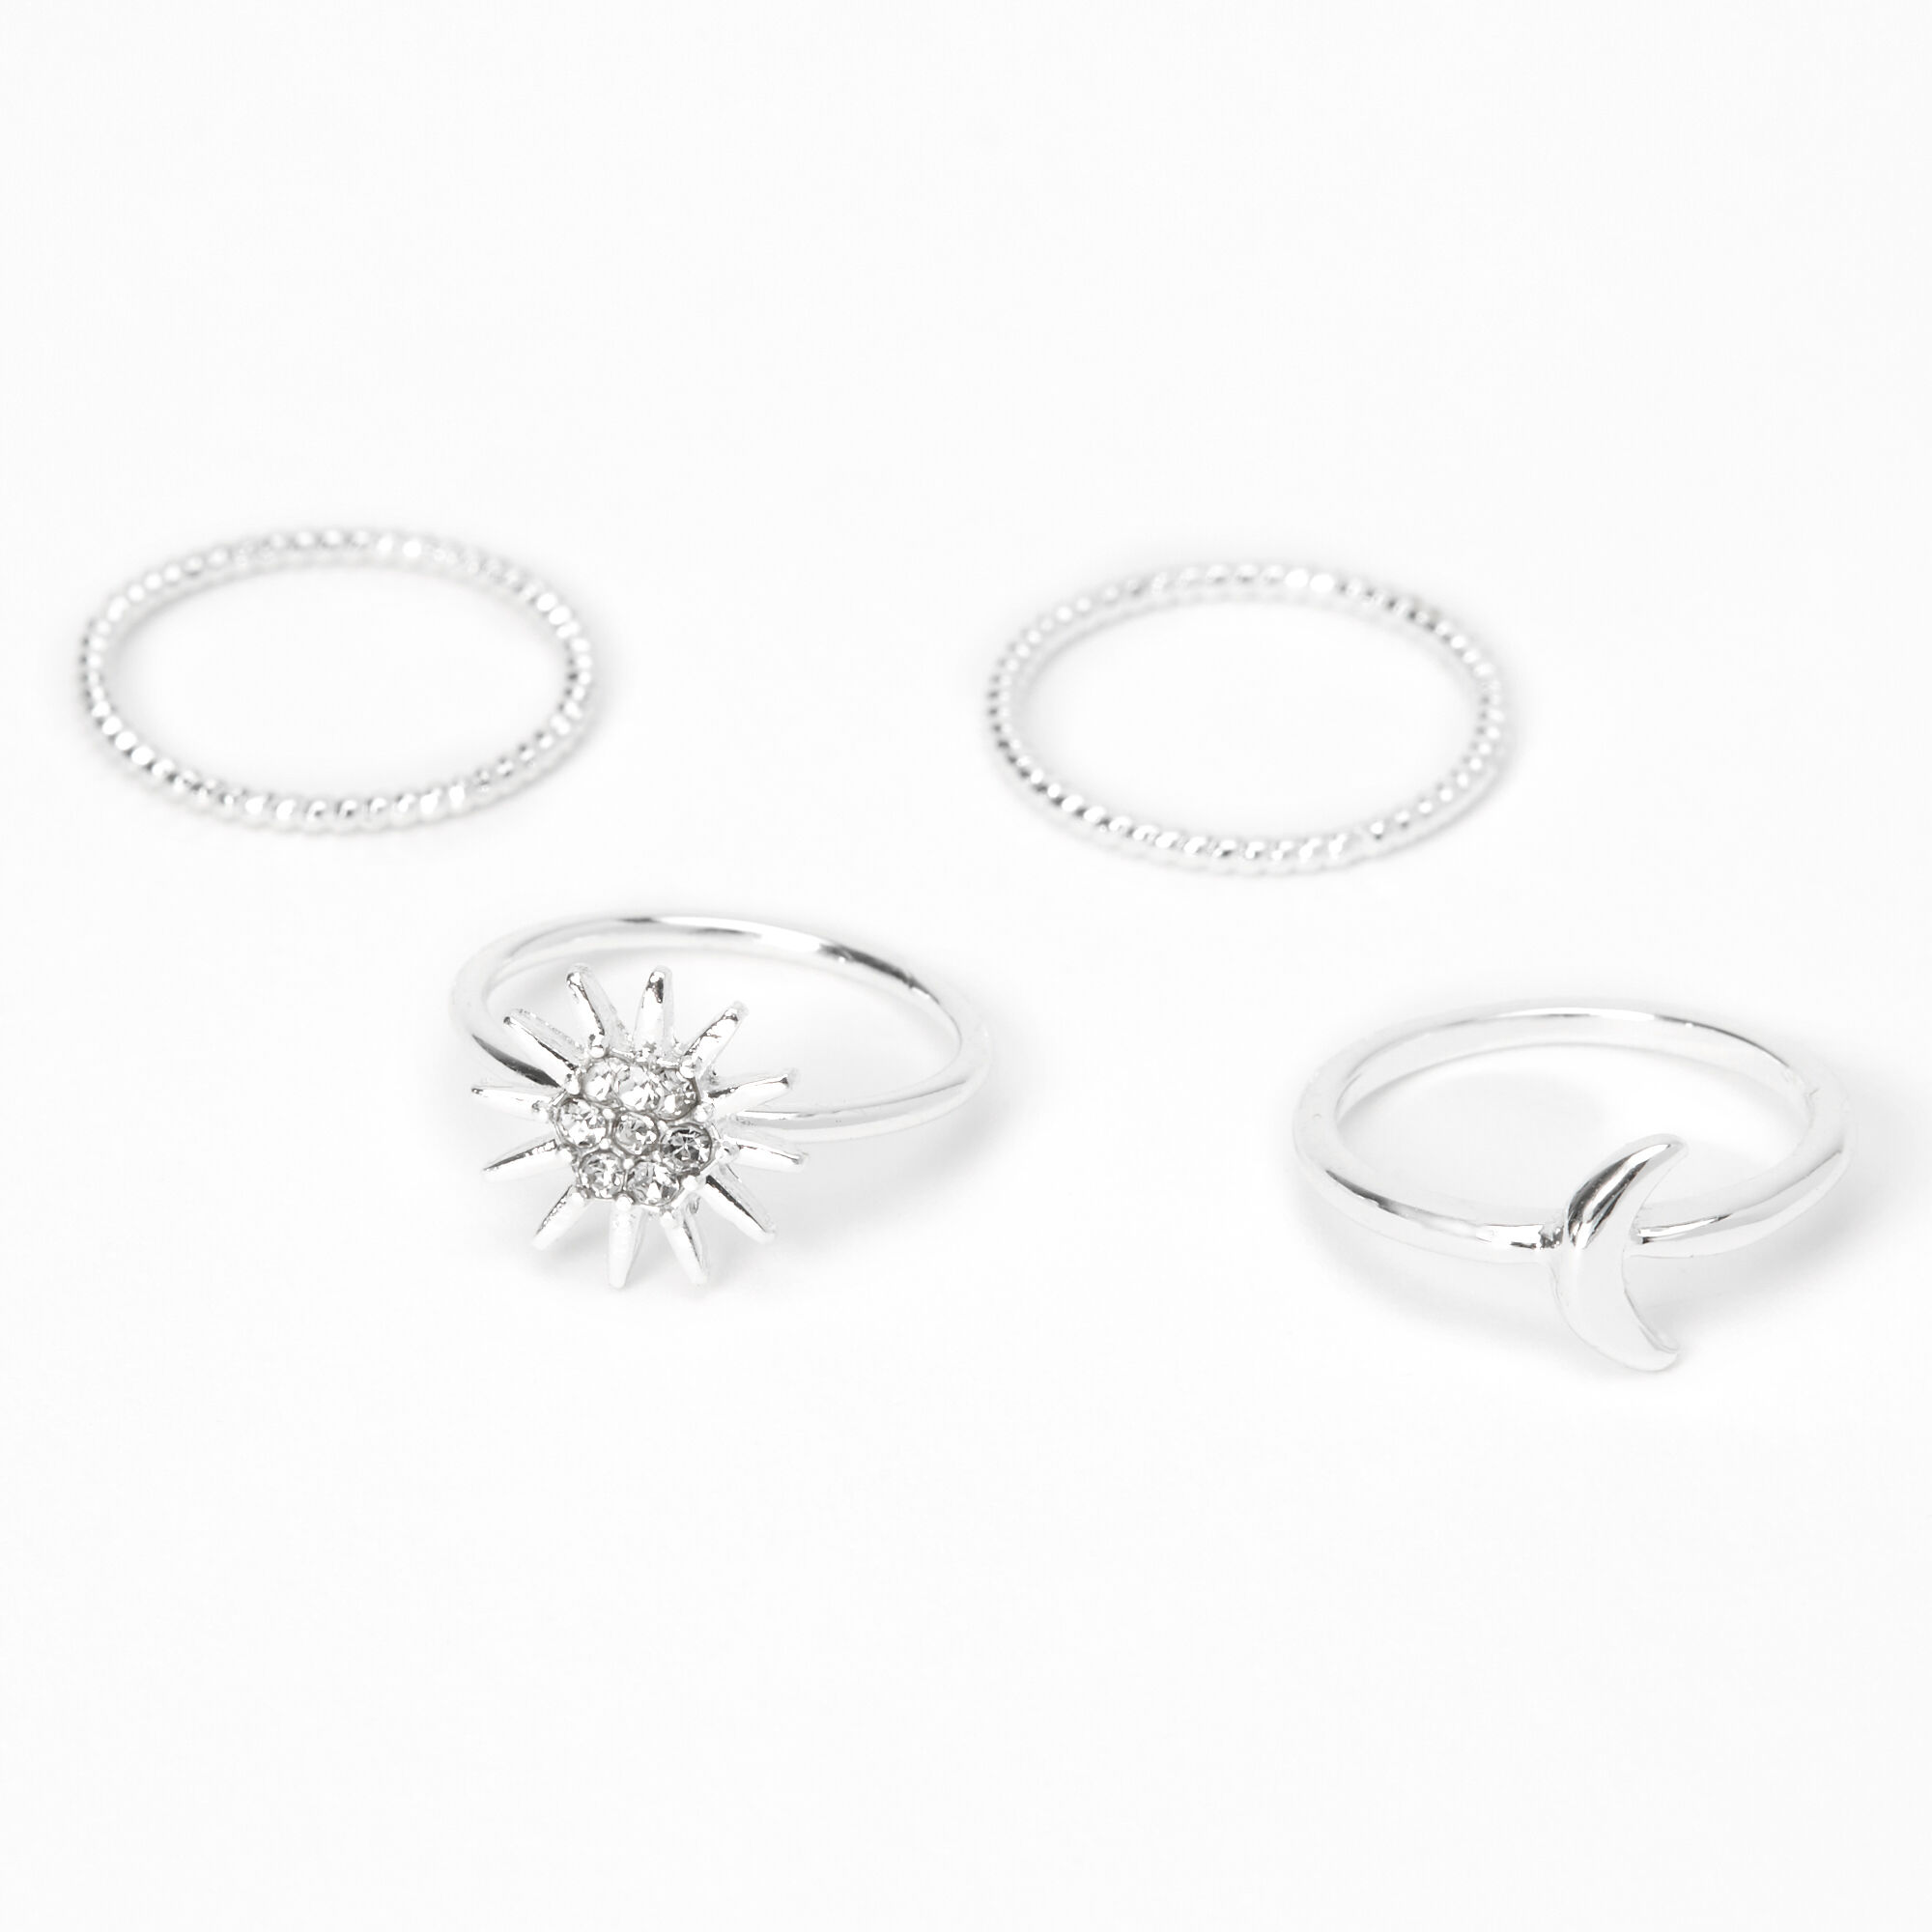 View Claires Tone Celestial Midi Rings 4 Pack Silver information